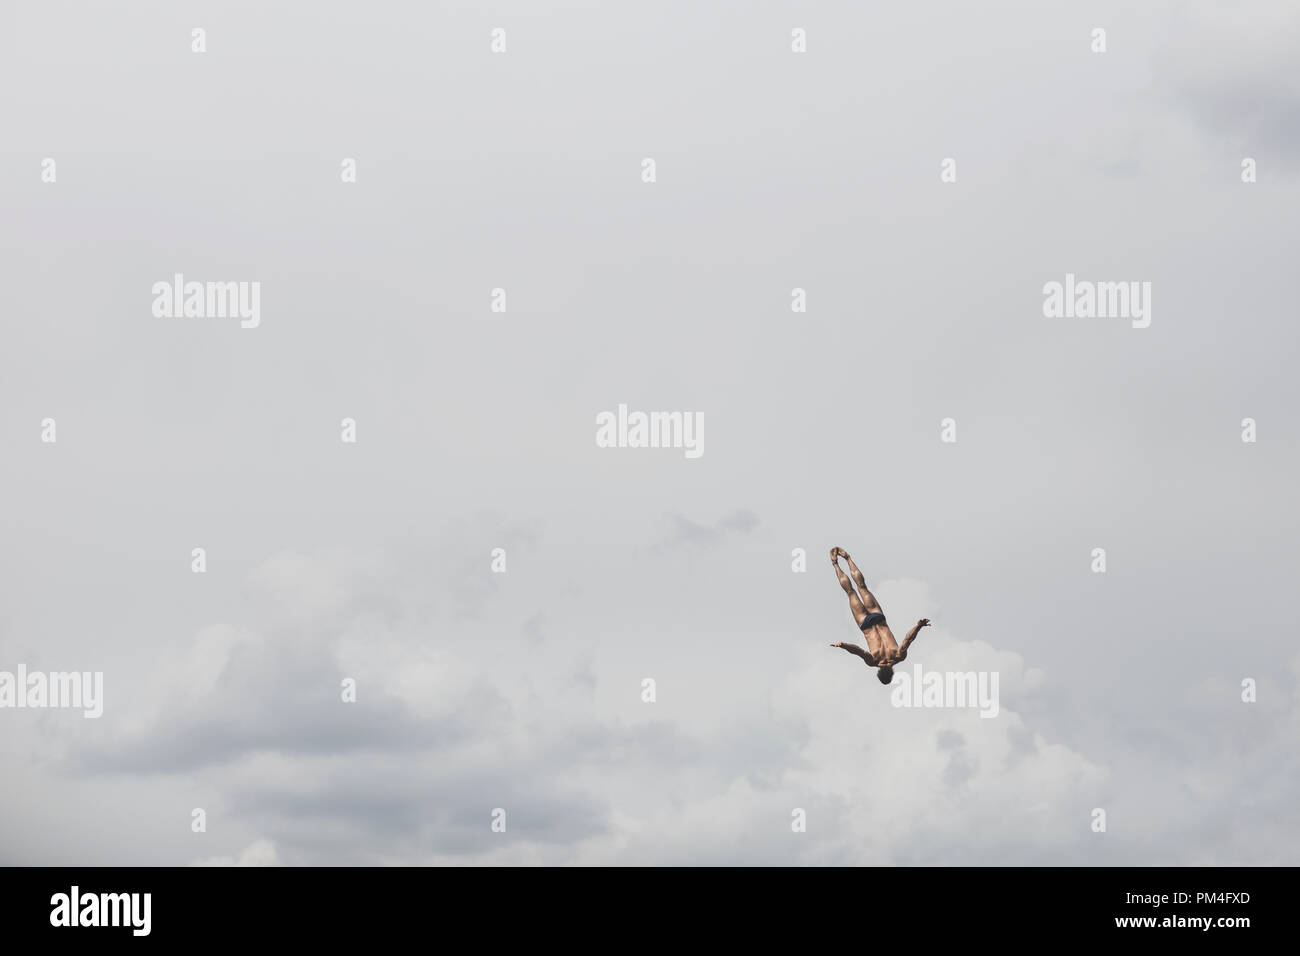 Denmark, Copenhagen - August 25, 2018. The cliff diving world elite draws all the attention to the 27m platform on the cantilever roof of the Opera House during the Red Bull Cliff Diving World Series in Copenhagen. (Photo credit: Gonzales Photo - Kenneth Nguyen). Stock Photo